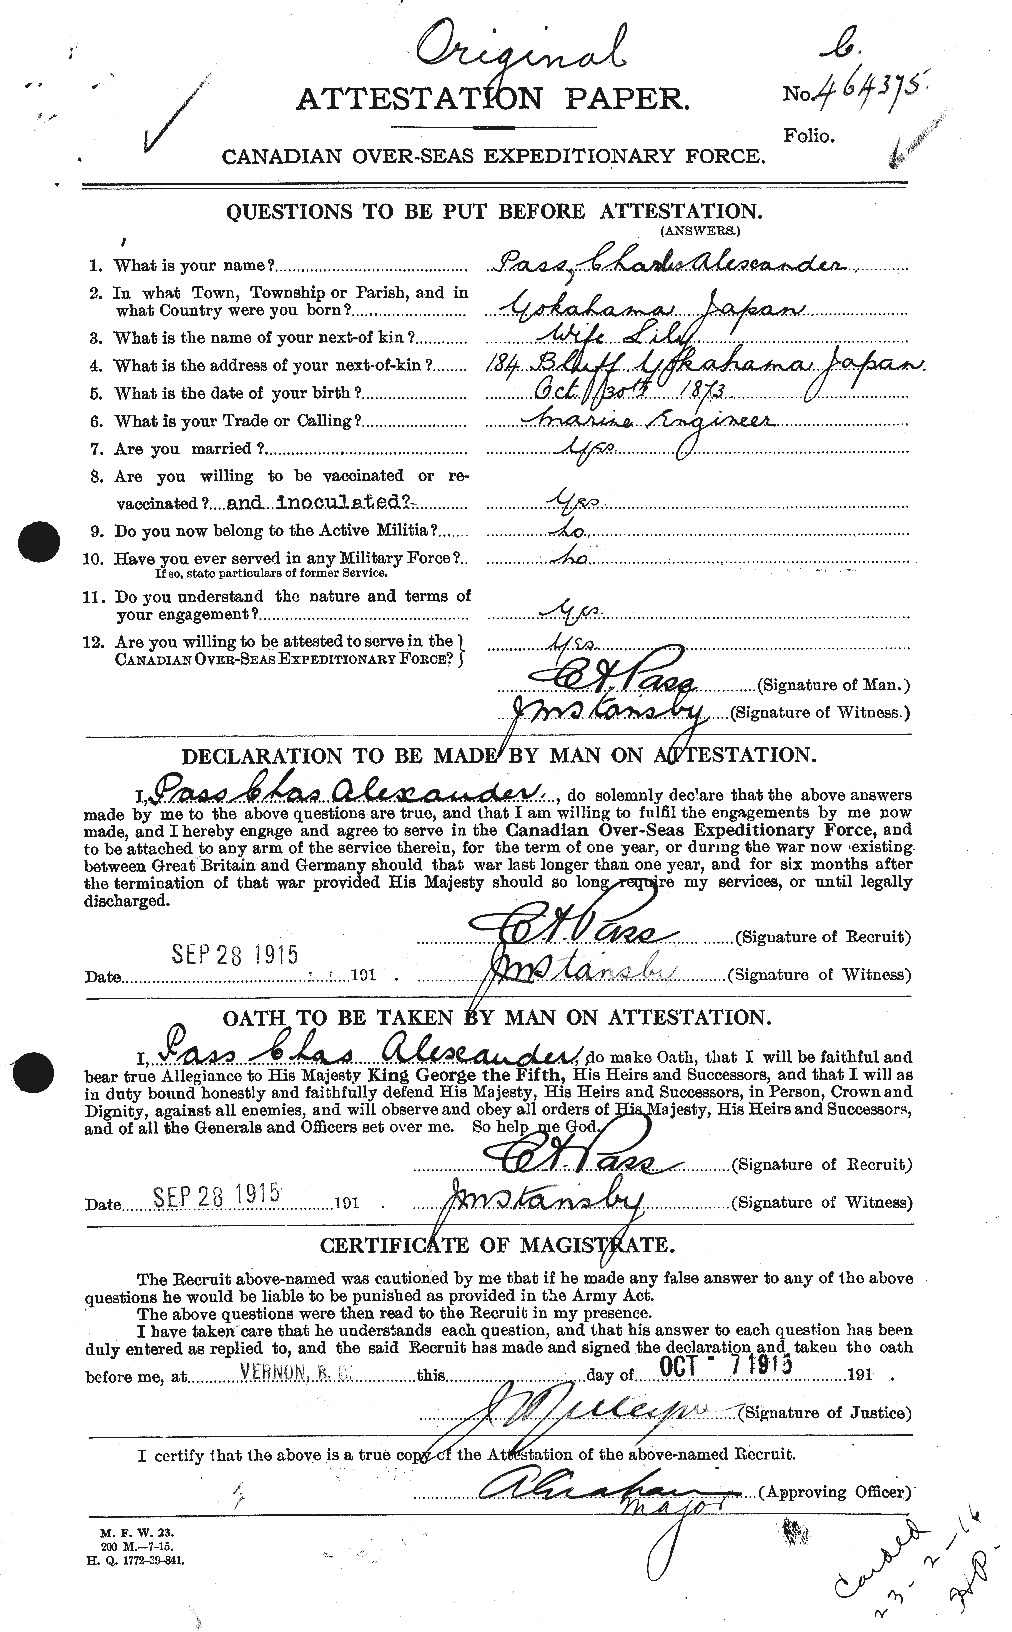 Personnel Records of the First World War - CEF 567301a